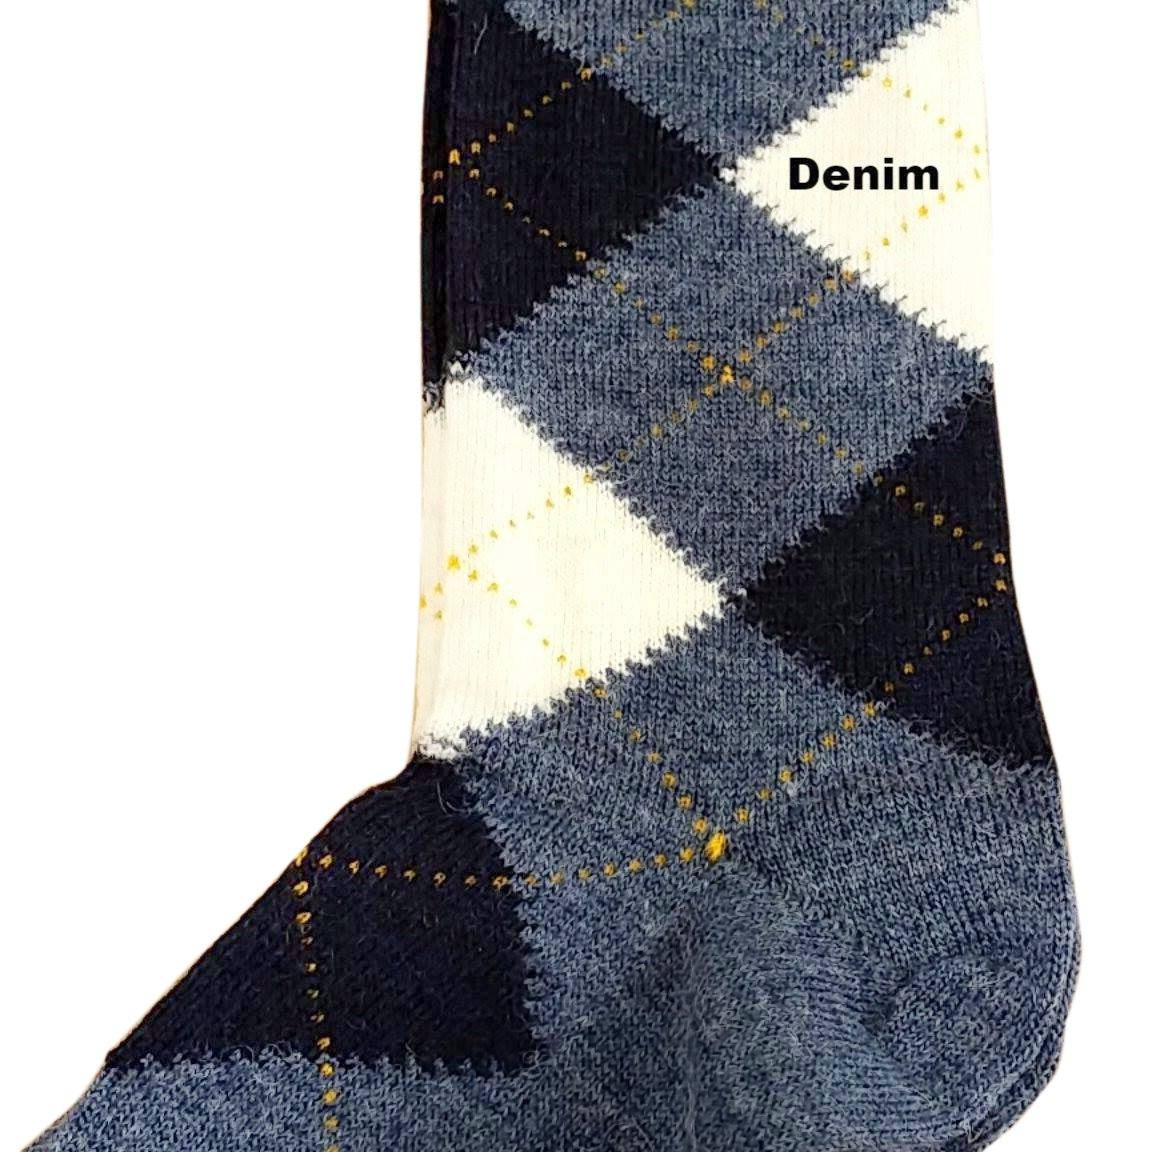 Luxurious alpaca argyle socks for golfers, foot golfers & everyday style! Superior comfort, breathable warmth, durable. Unique alpaca gift. Shop now!